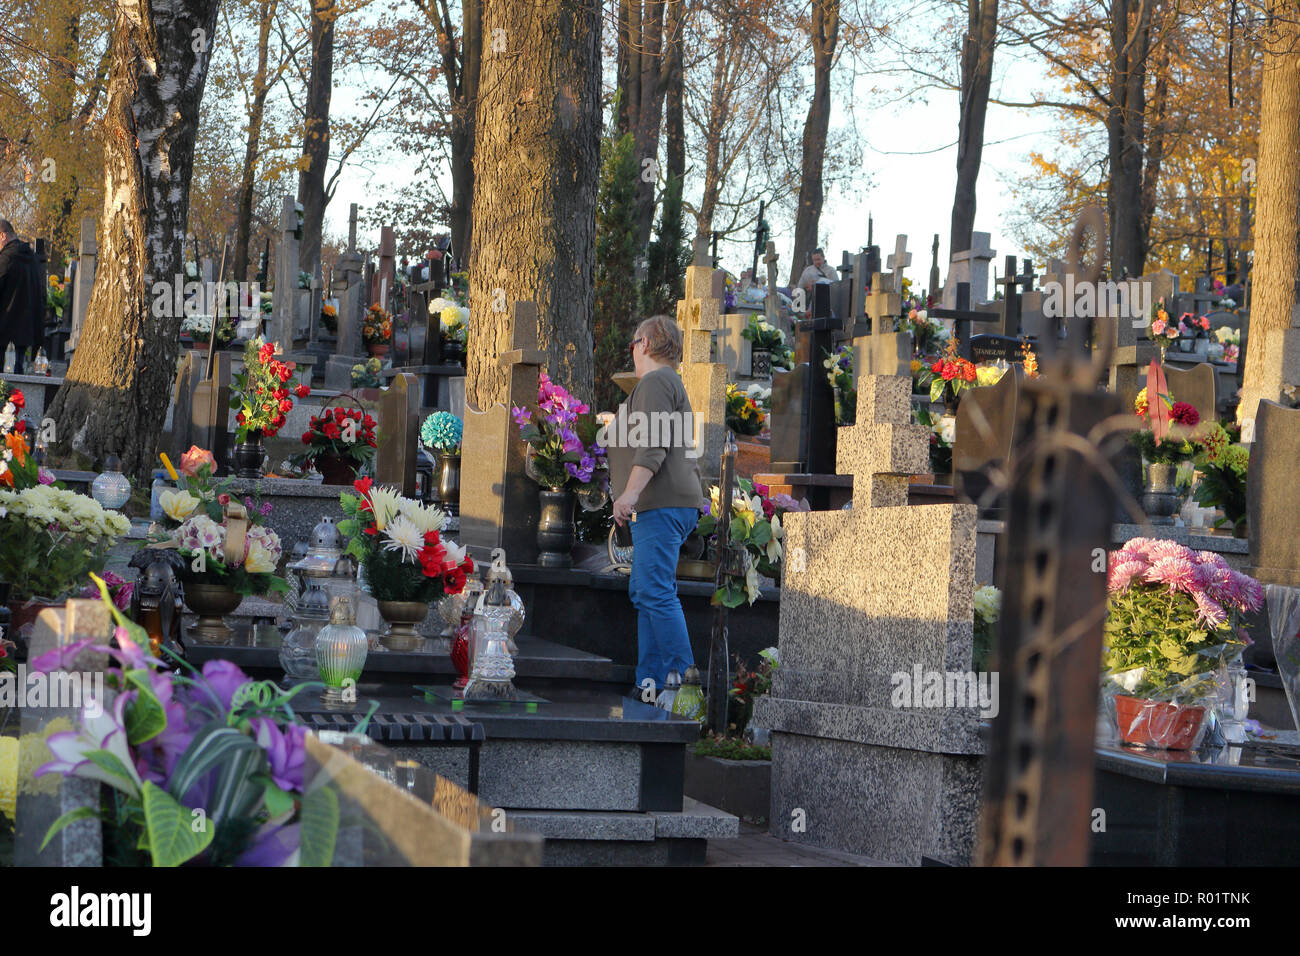 ZACHELMIE, POLAND - OCTOBER 31, 2018: A woman tends to a grave in cemetery on the eve of All Saints' Day. Credit: Slawomir Wojcik/Alamy Live News Stock Photo